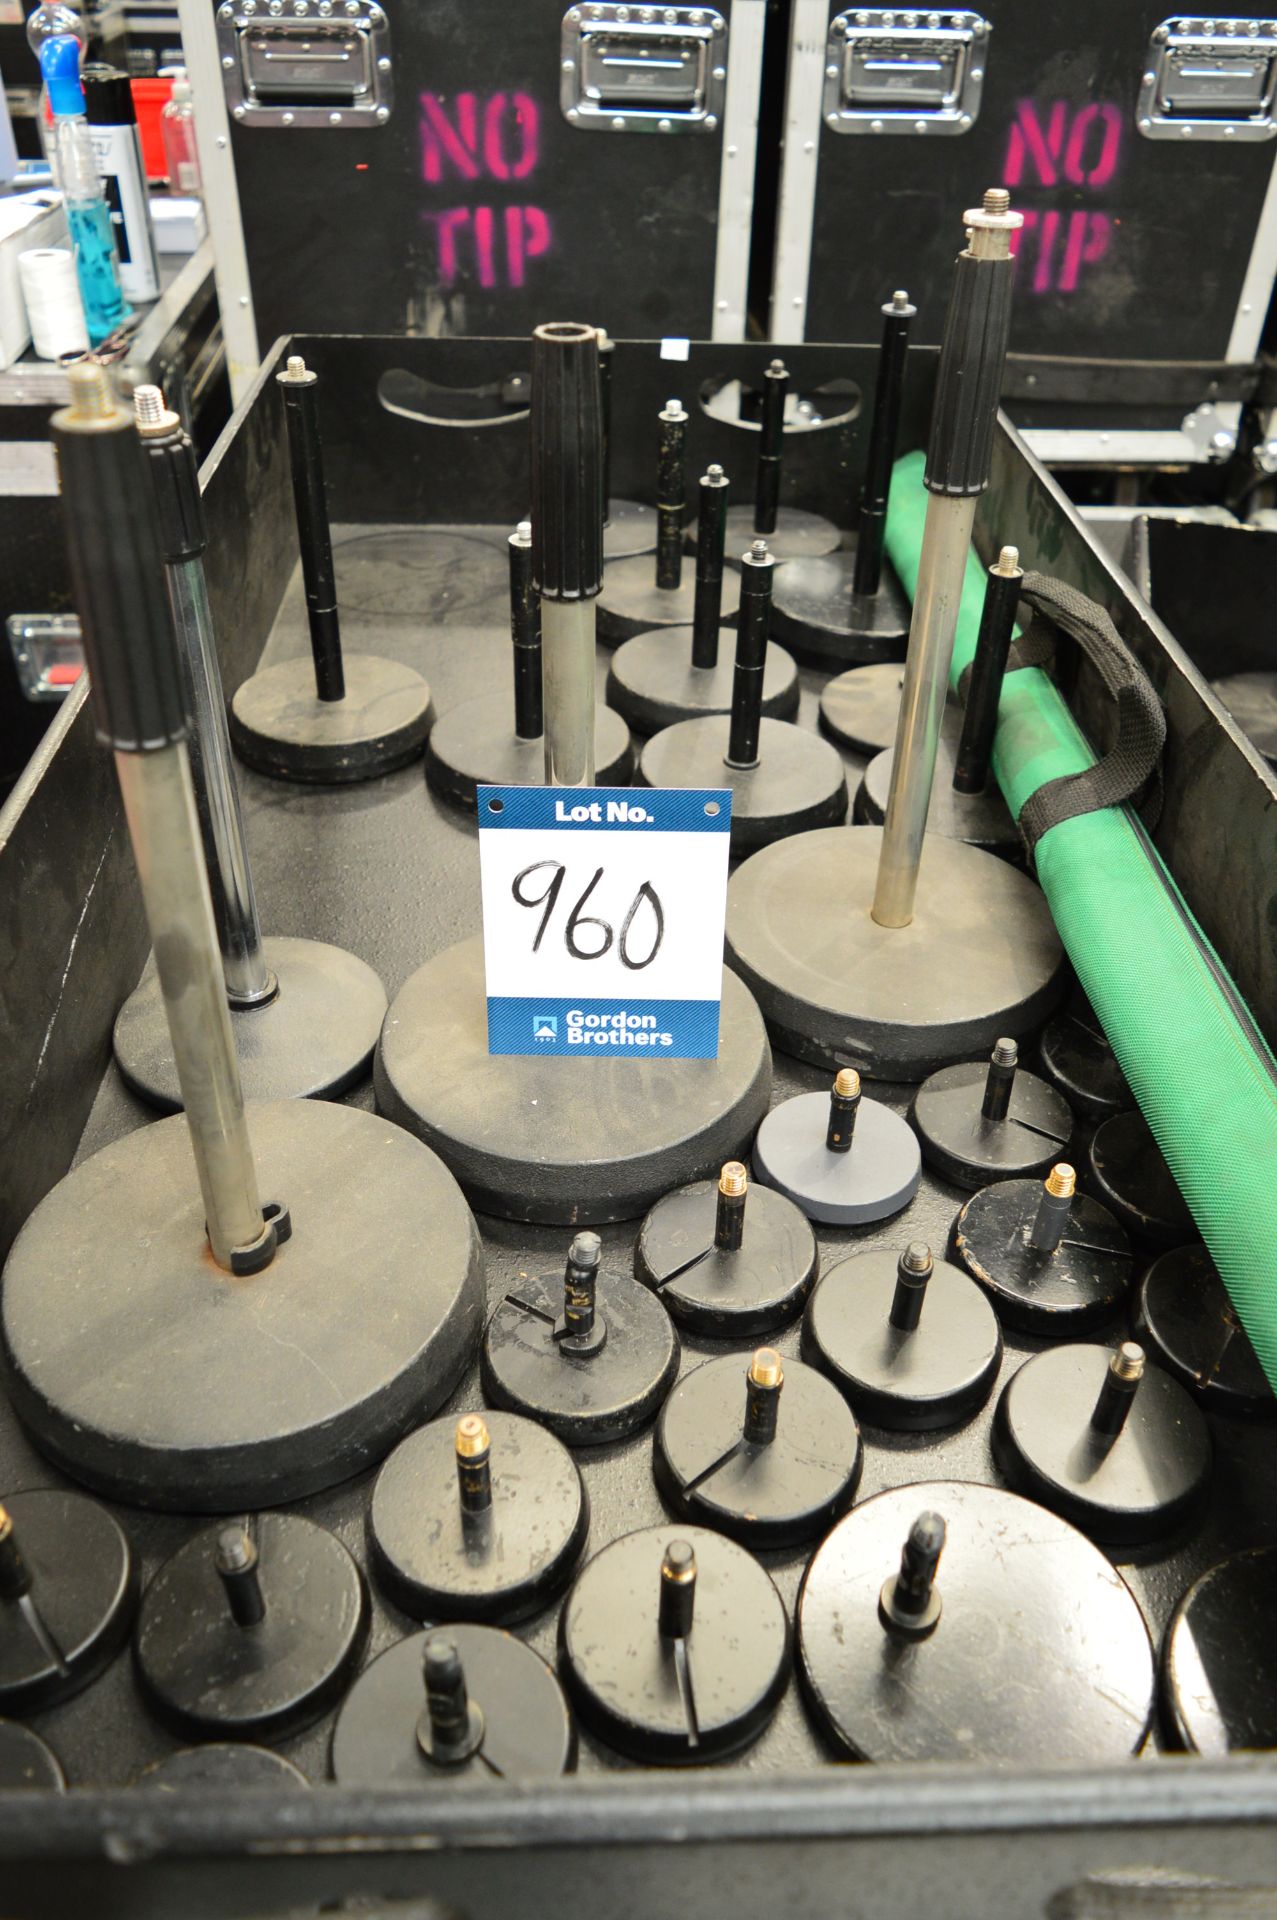 4x No. table microphone stands and quantity of var